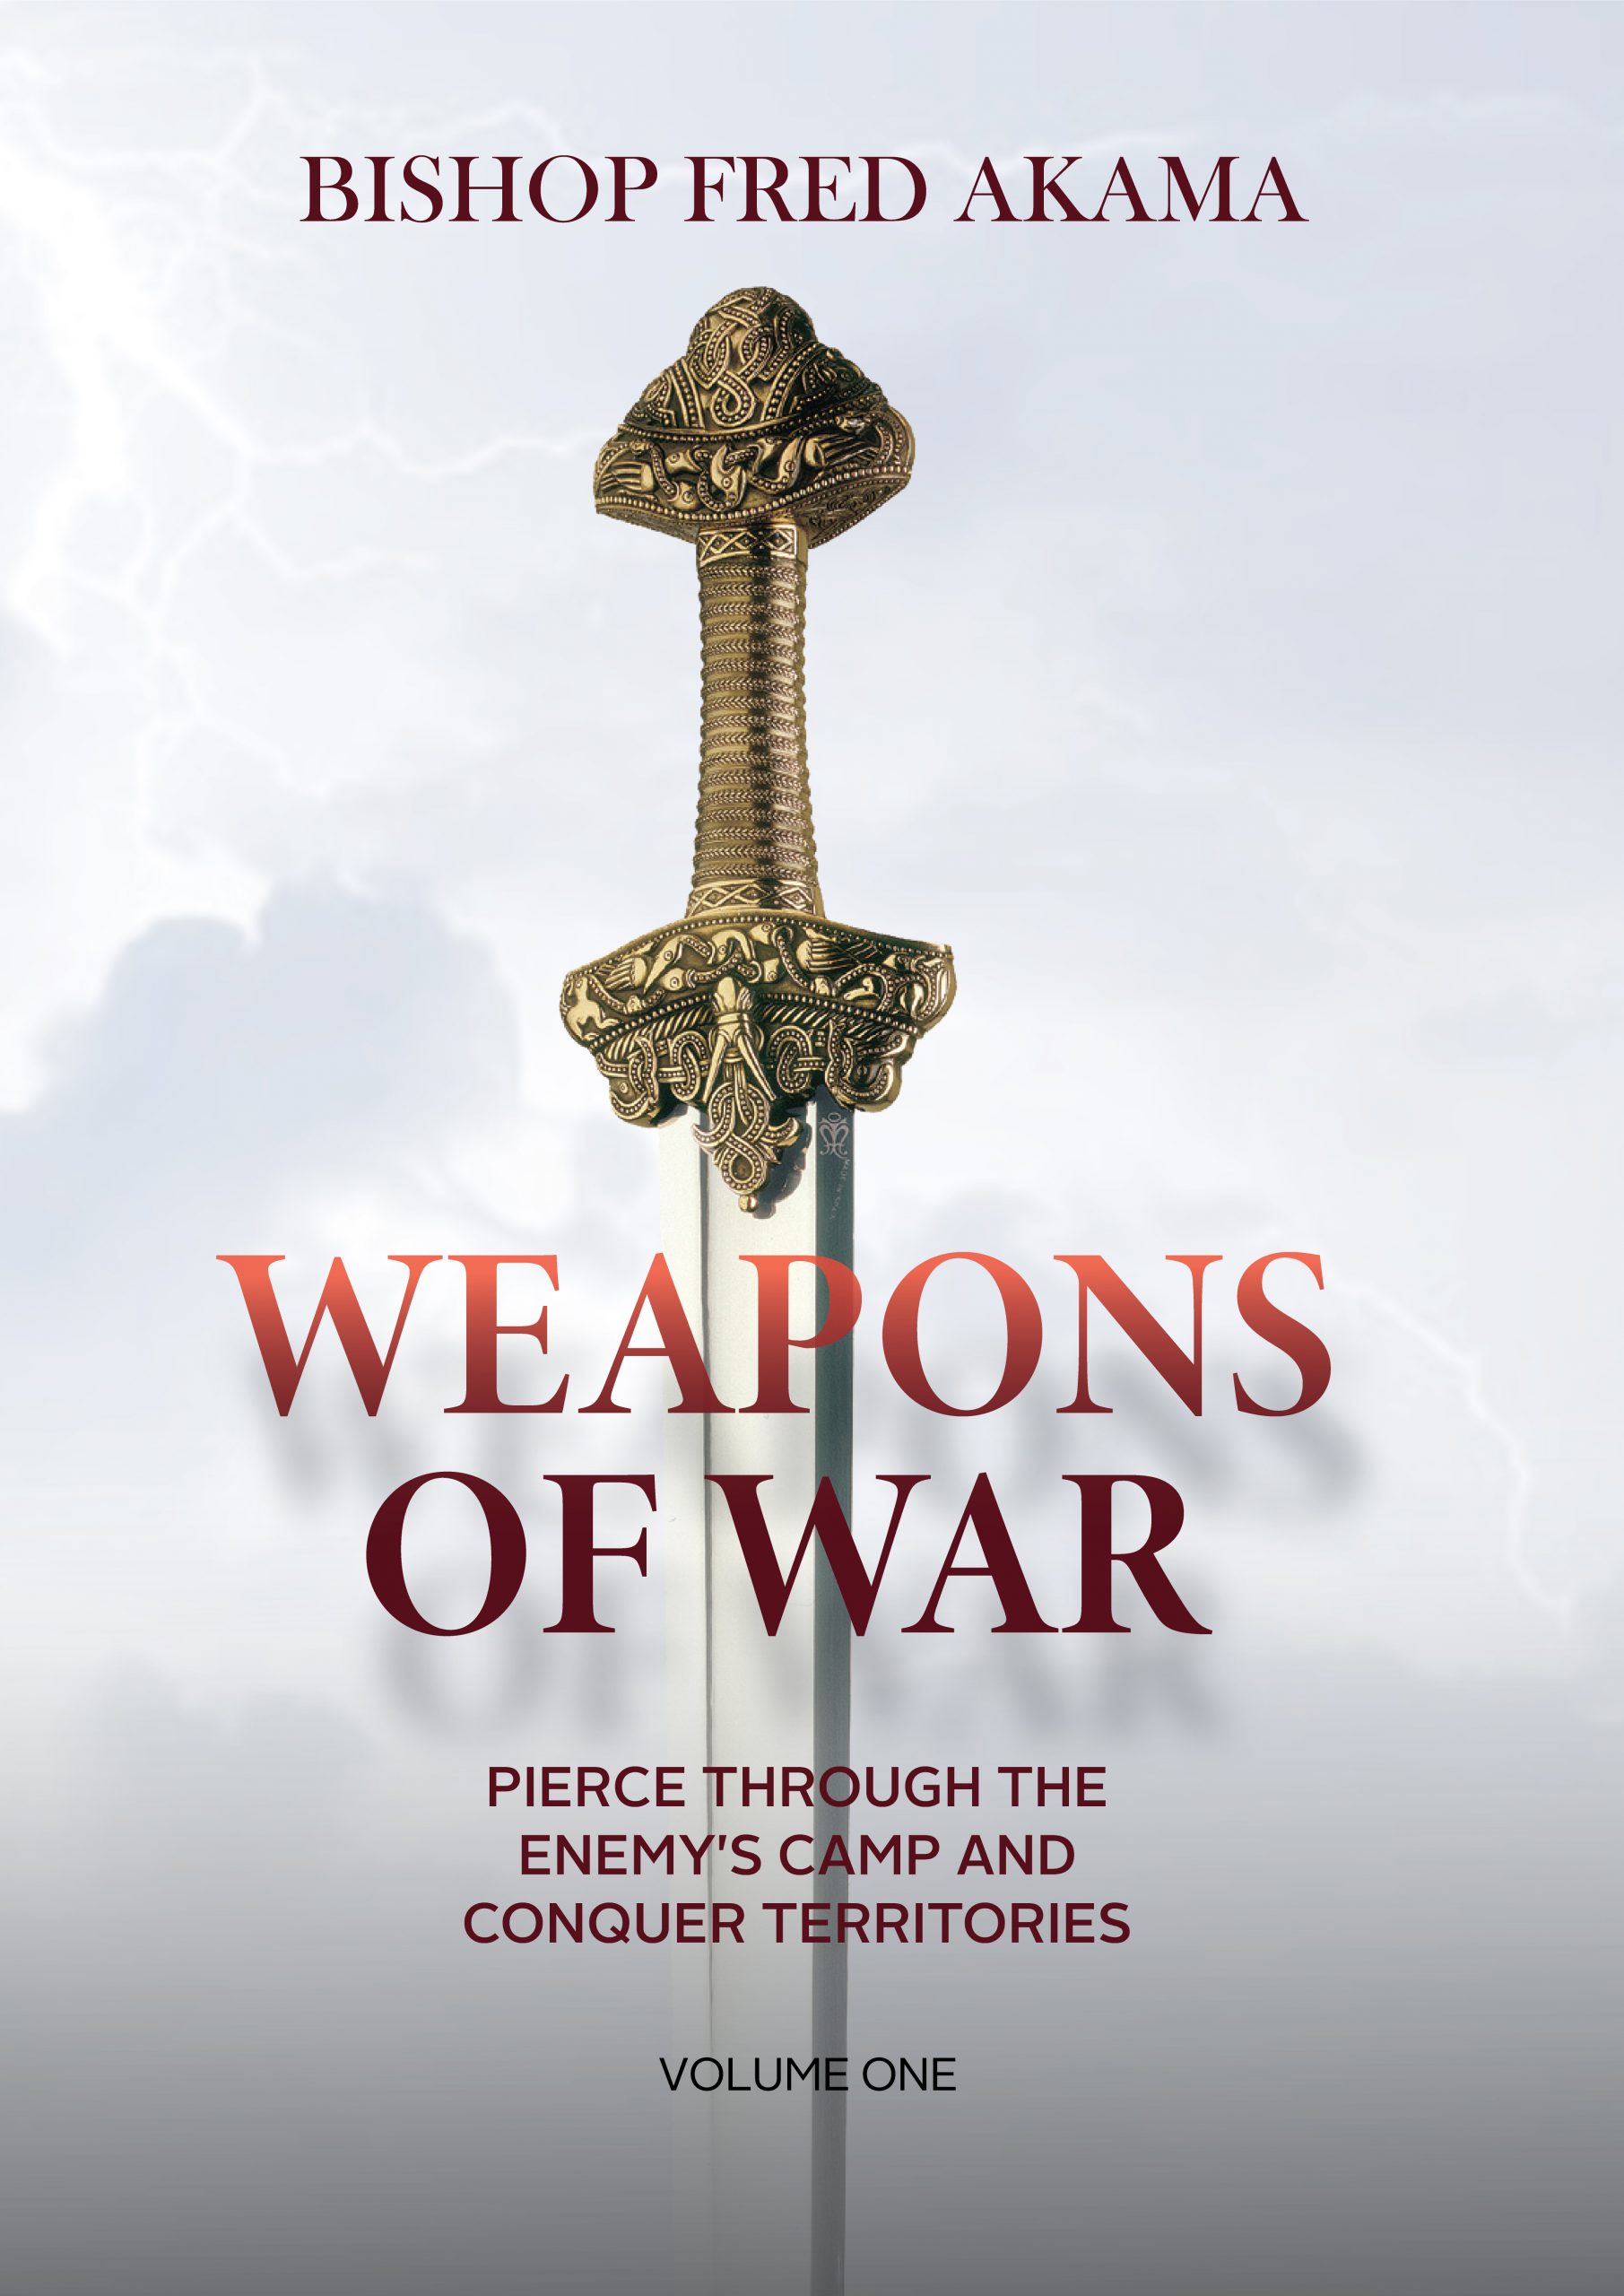 Weapons-of-war--for-print-front